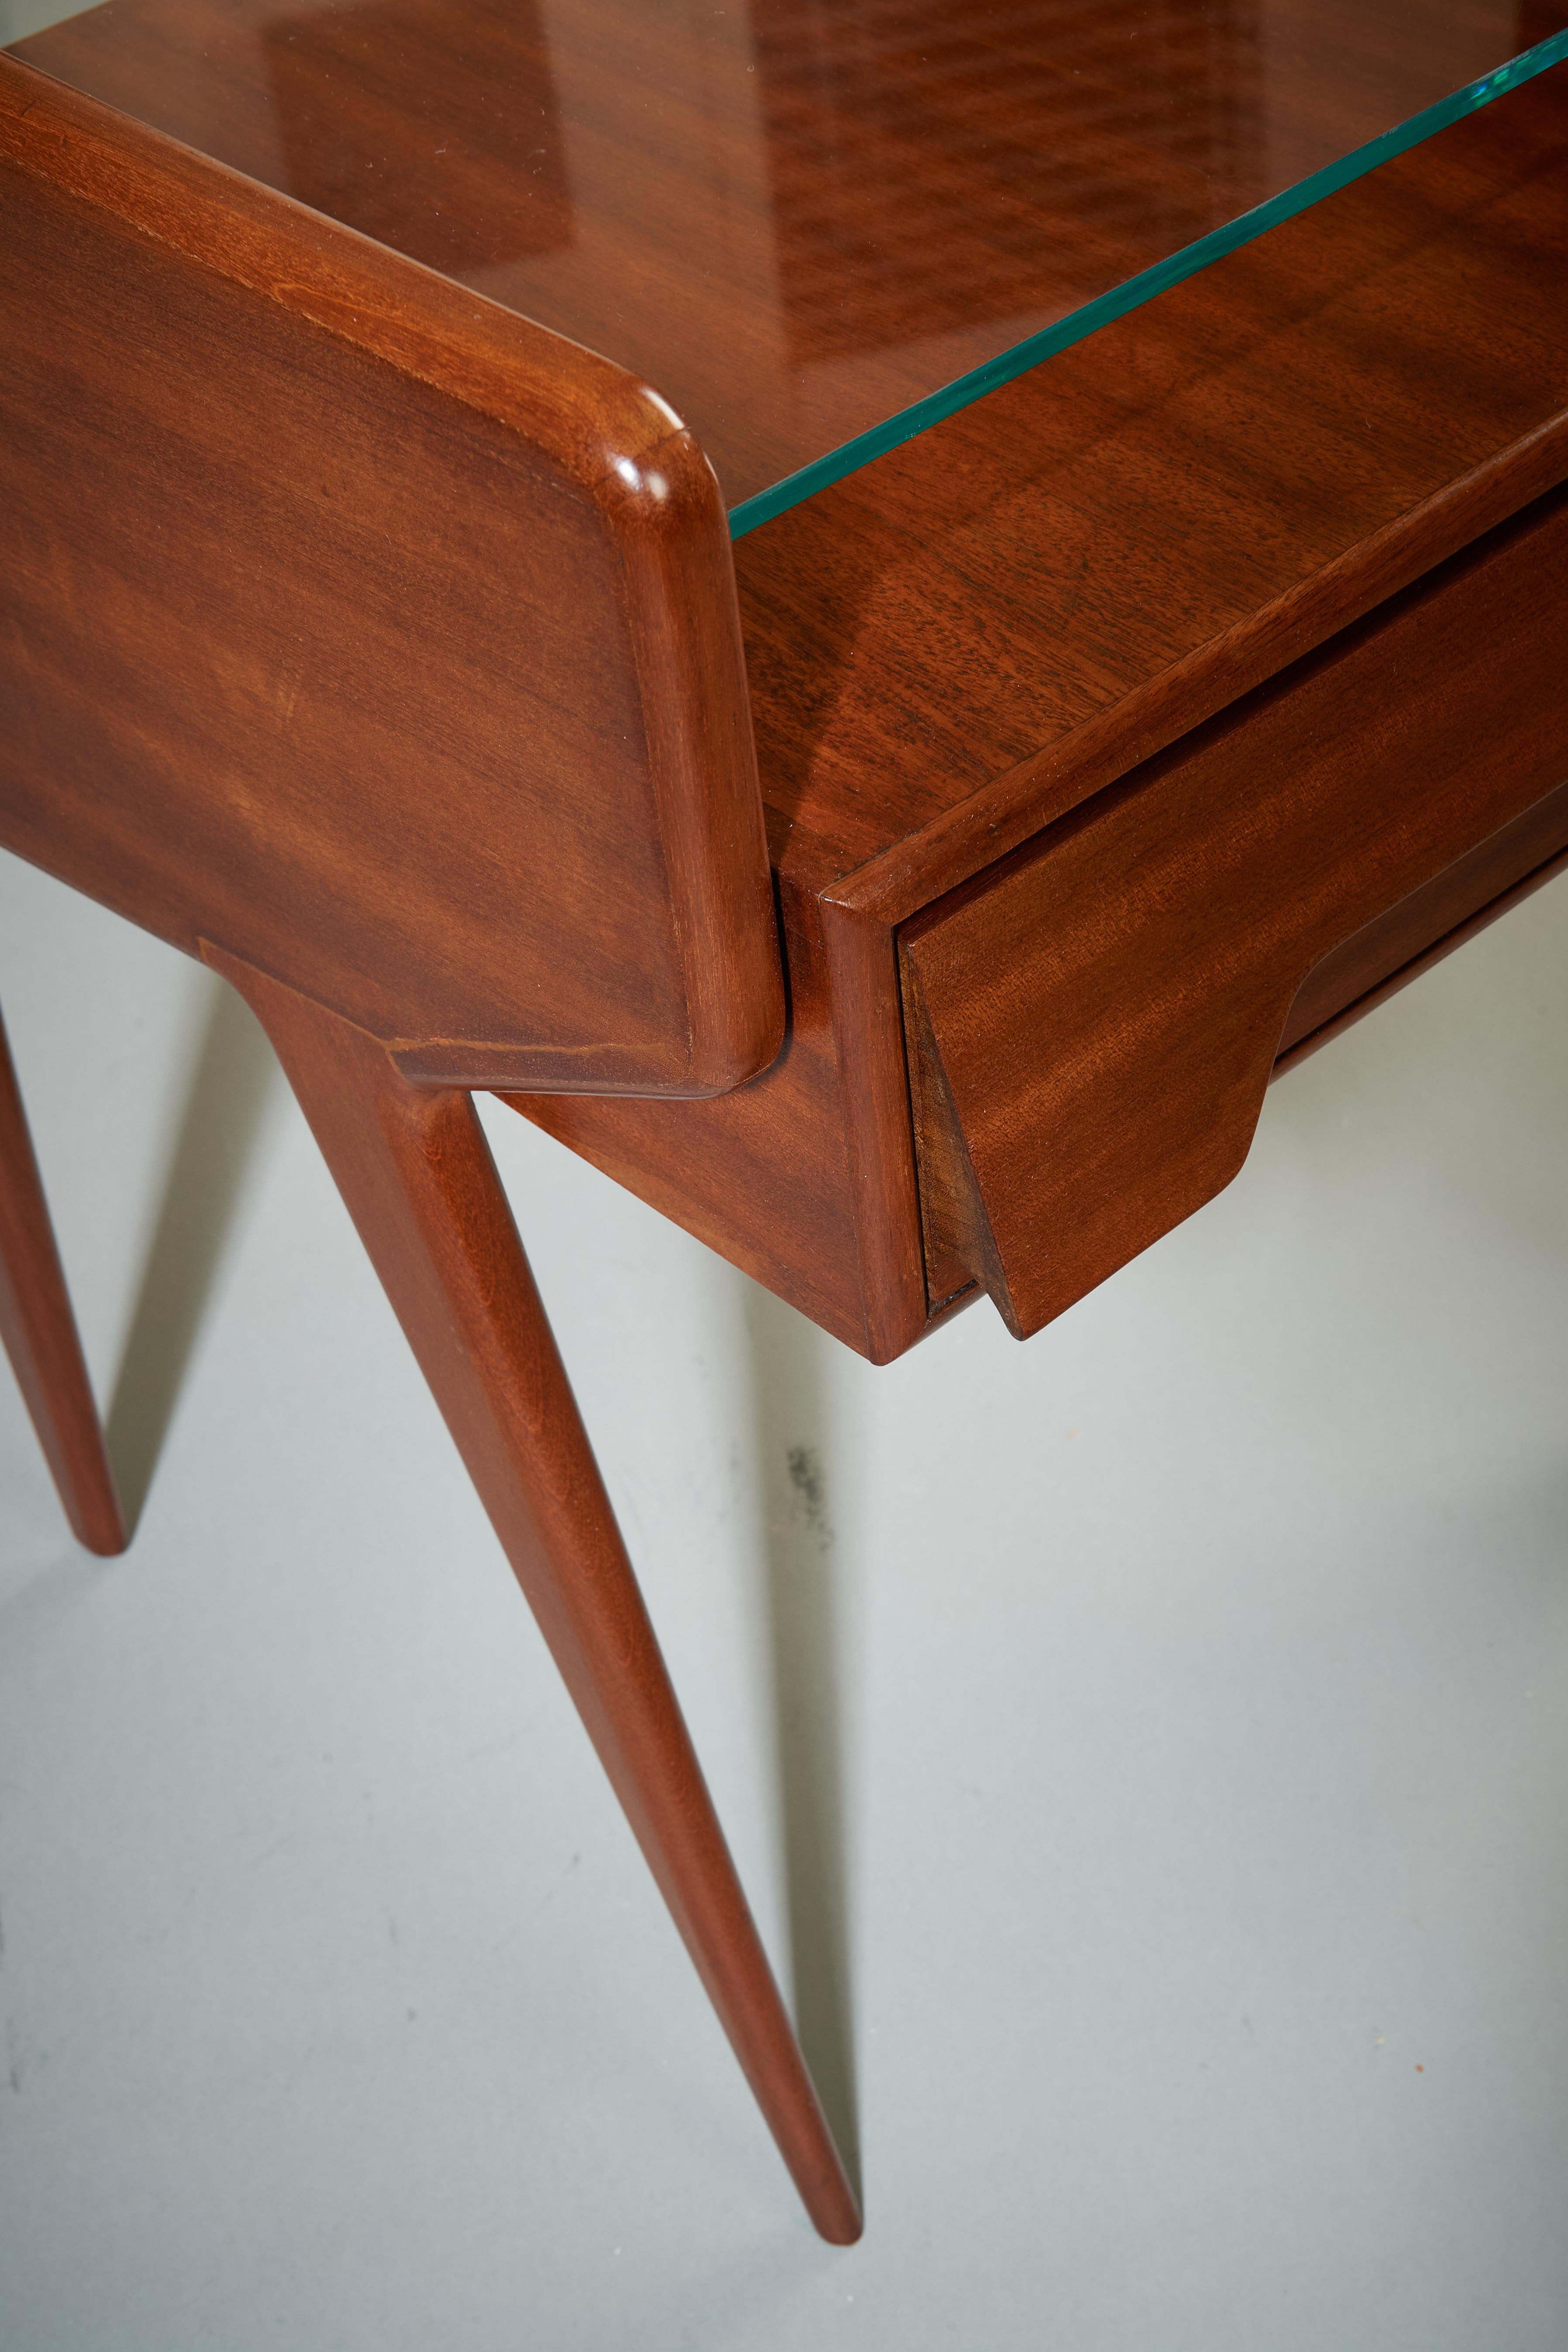 Pair of Organic Modern Mahogany & Glass Nightstands ITSO Ico Parisi, Italy 1950s For Sale 9